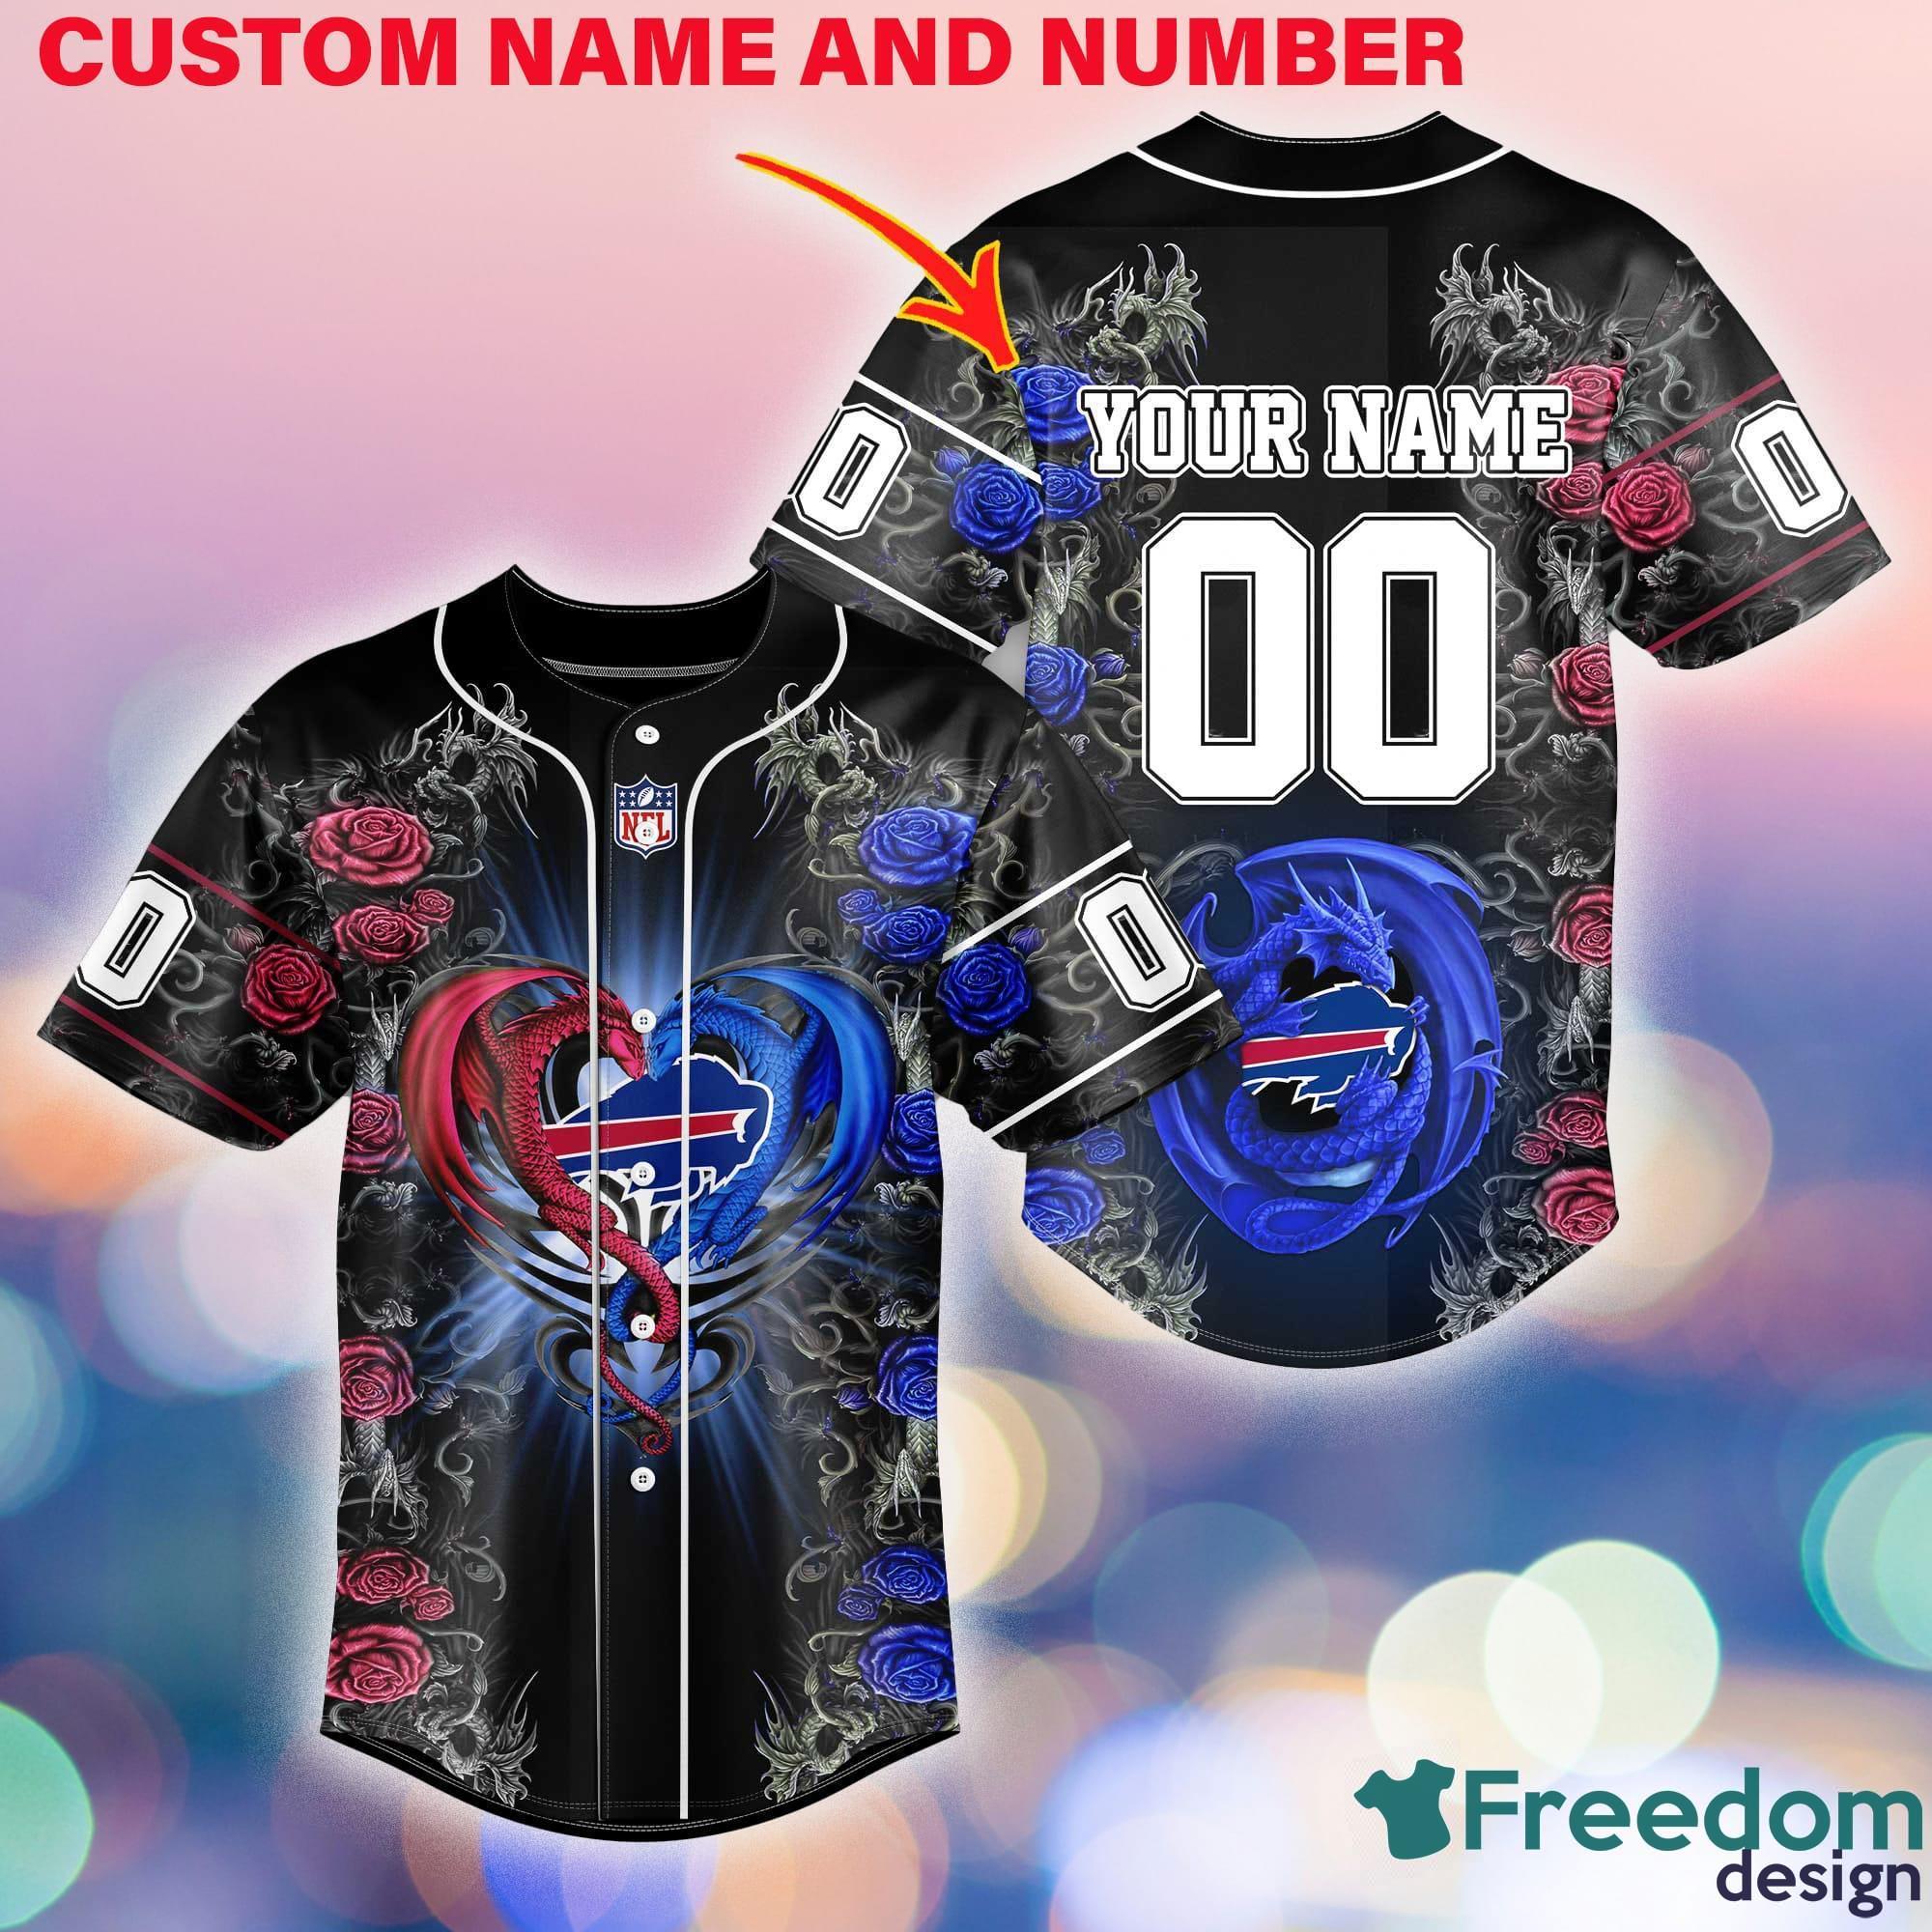 Buffalo-Bills-Custom-Number-And-Name-NFL-Dragon-Jersey-Shirt-Gift-For-Fans